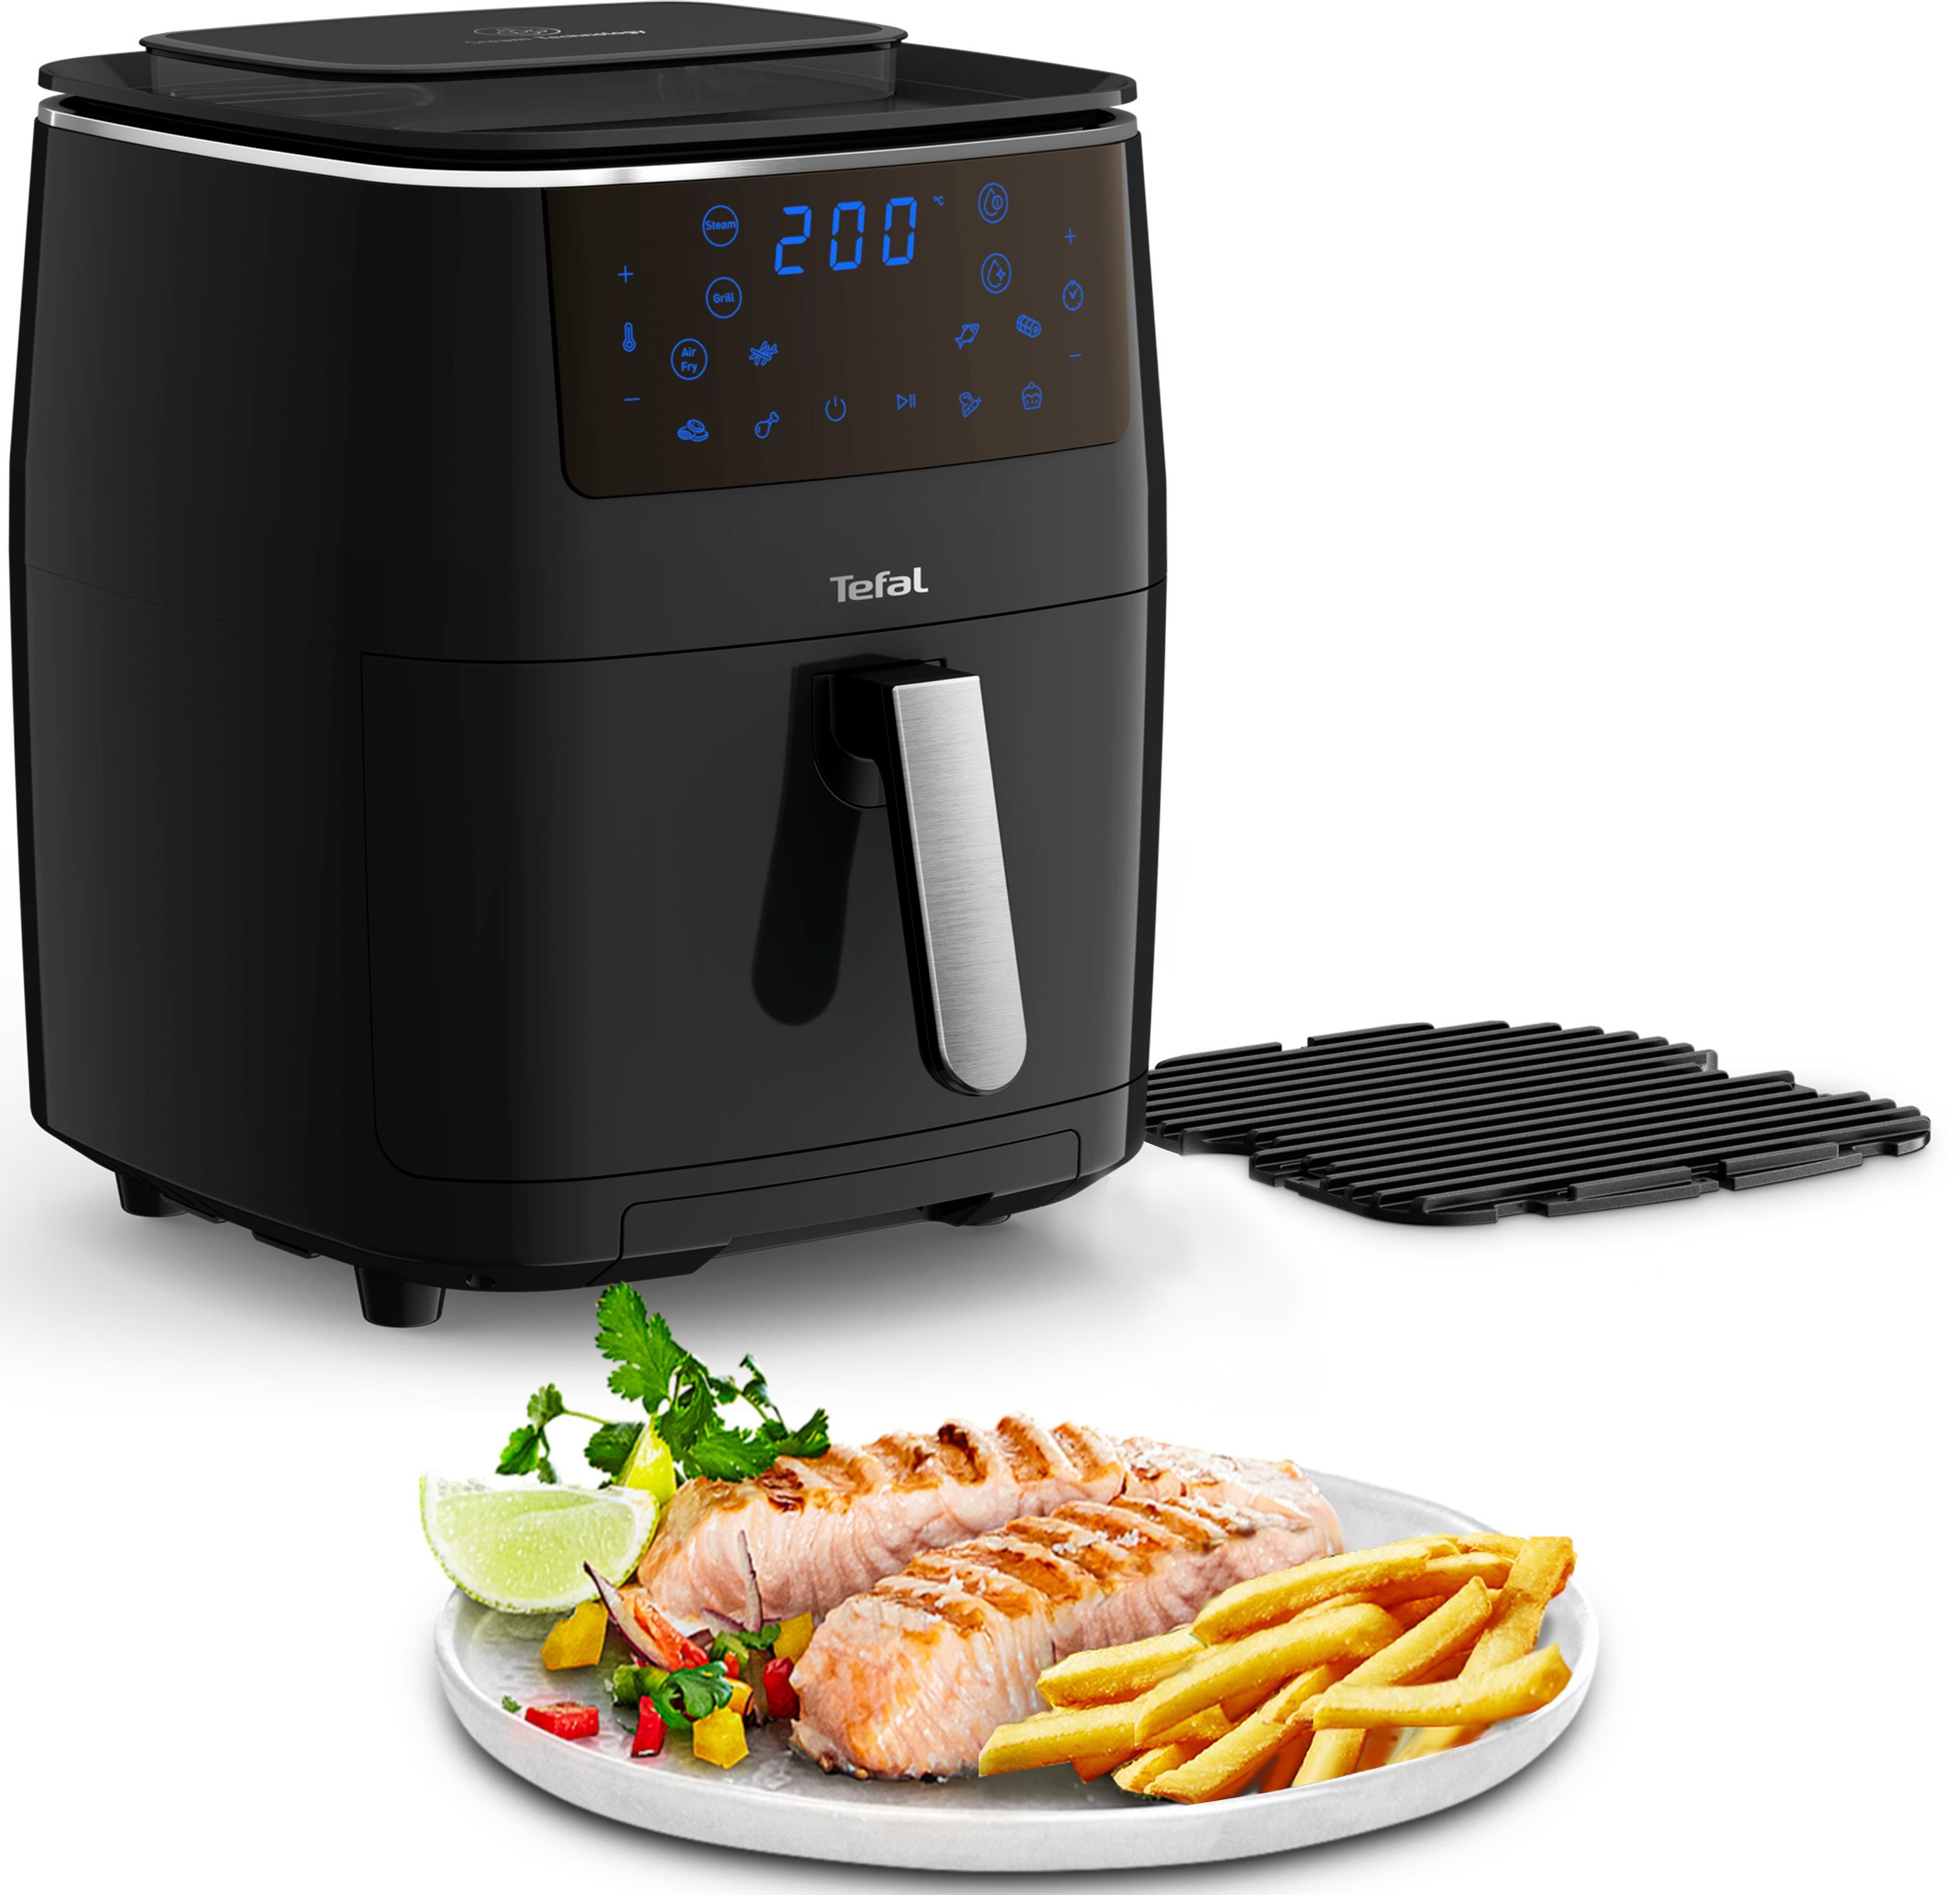 1700 + Programme, Fry Easy W, FW2018 Steam, Dampfgarer, Heißluftfritteuse Grill & Grill automatische Tefal 7